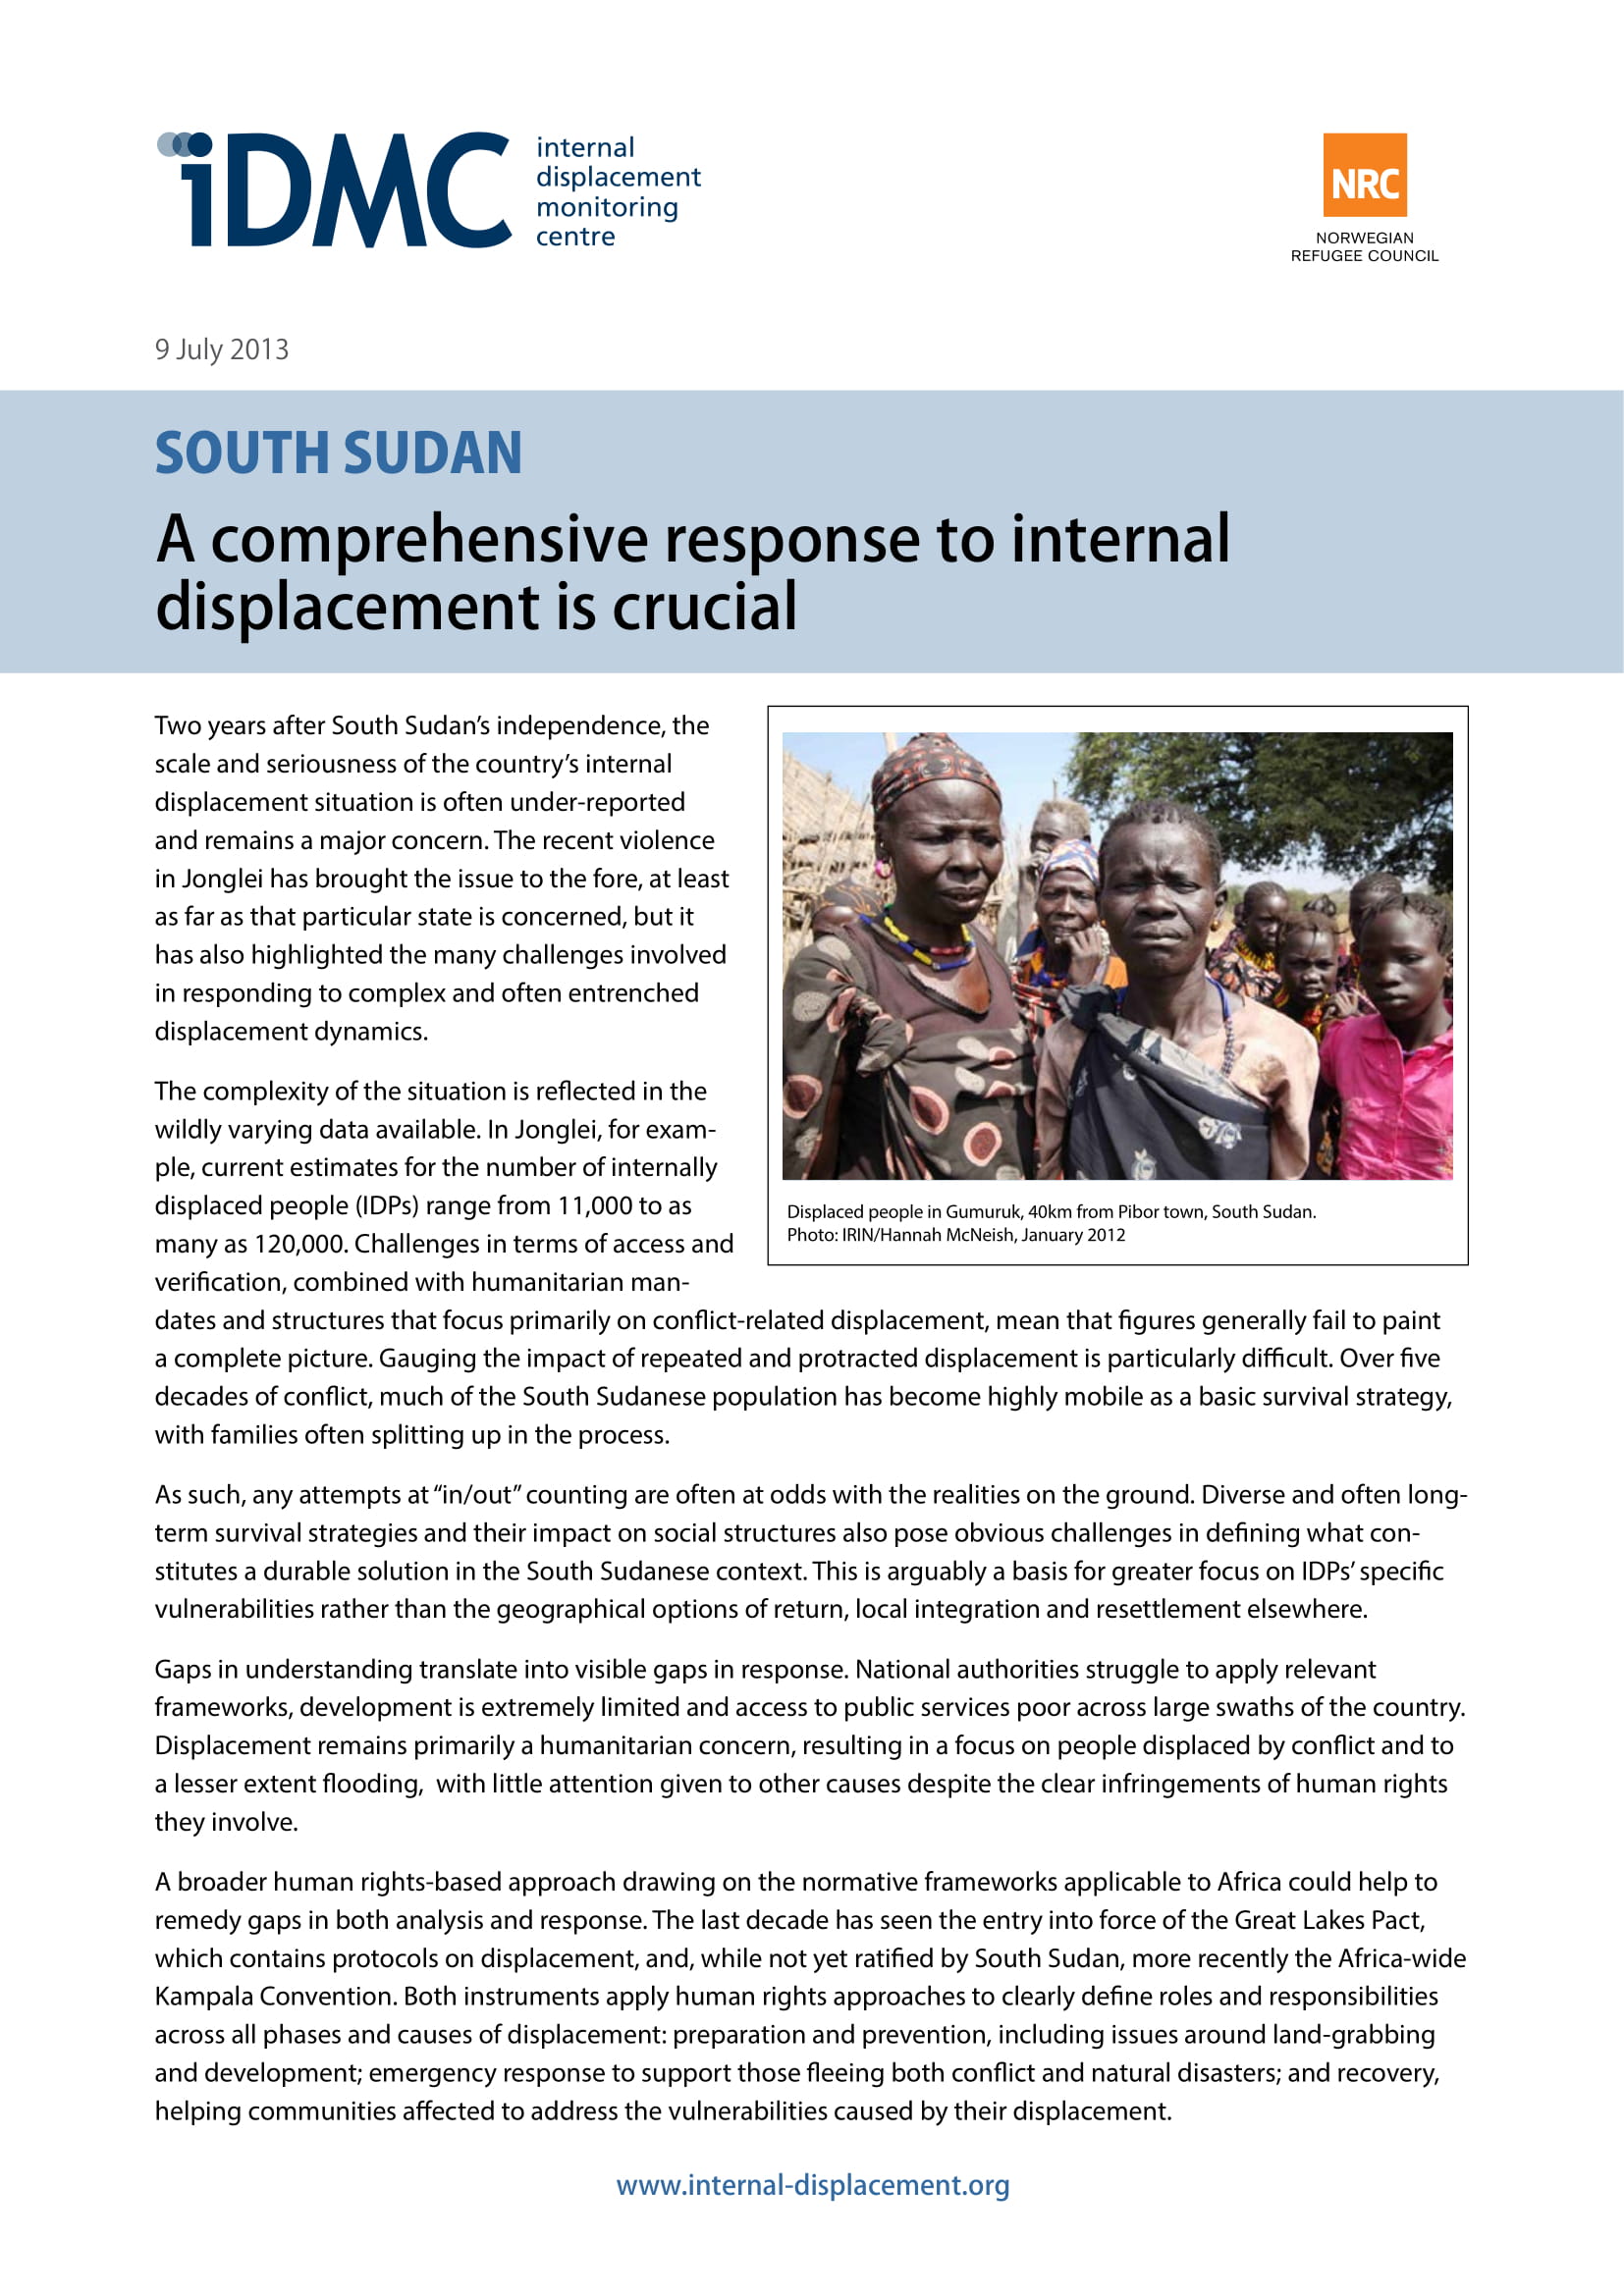 South Sudan: A comprehensive response to internal displacement is crucial